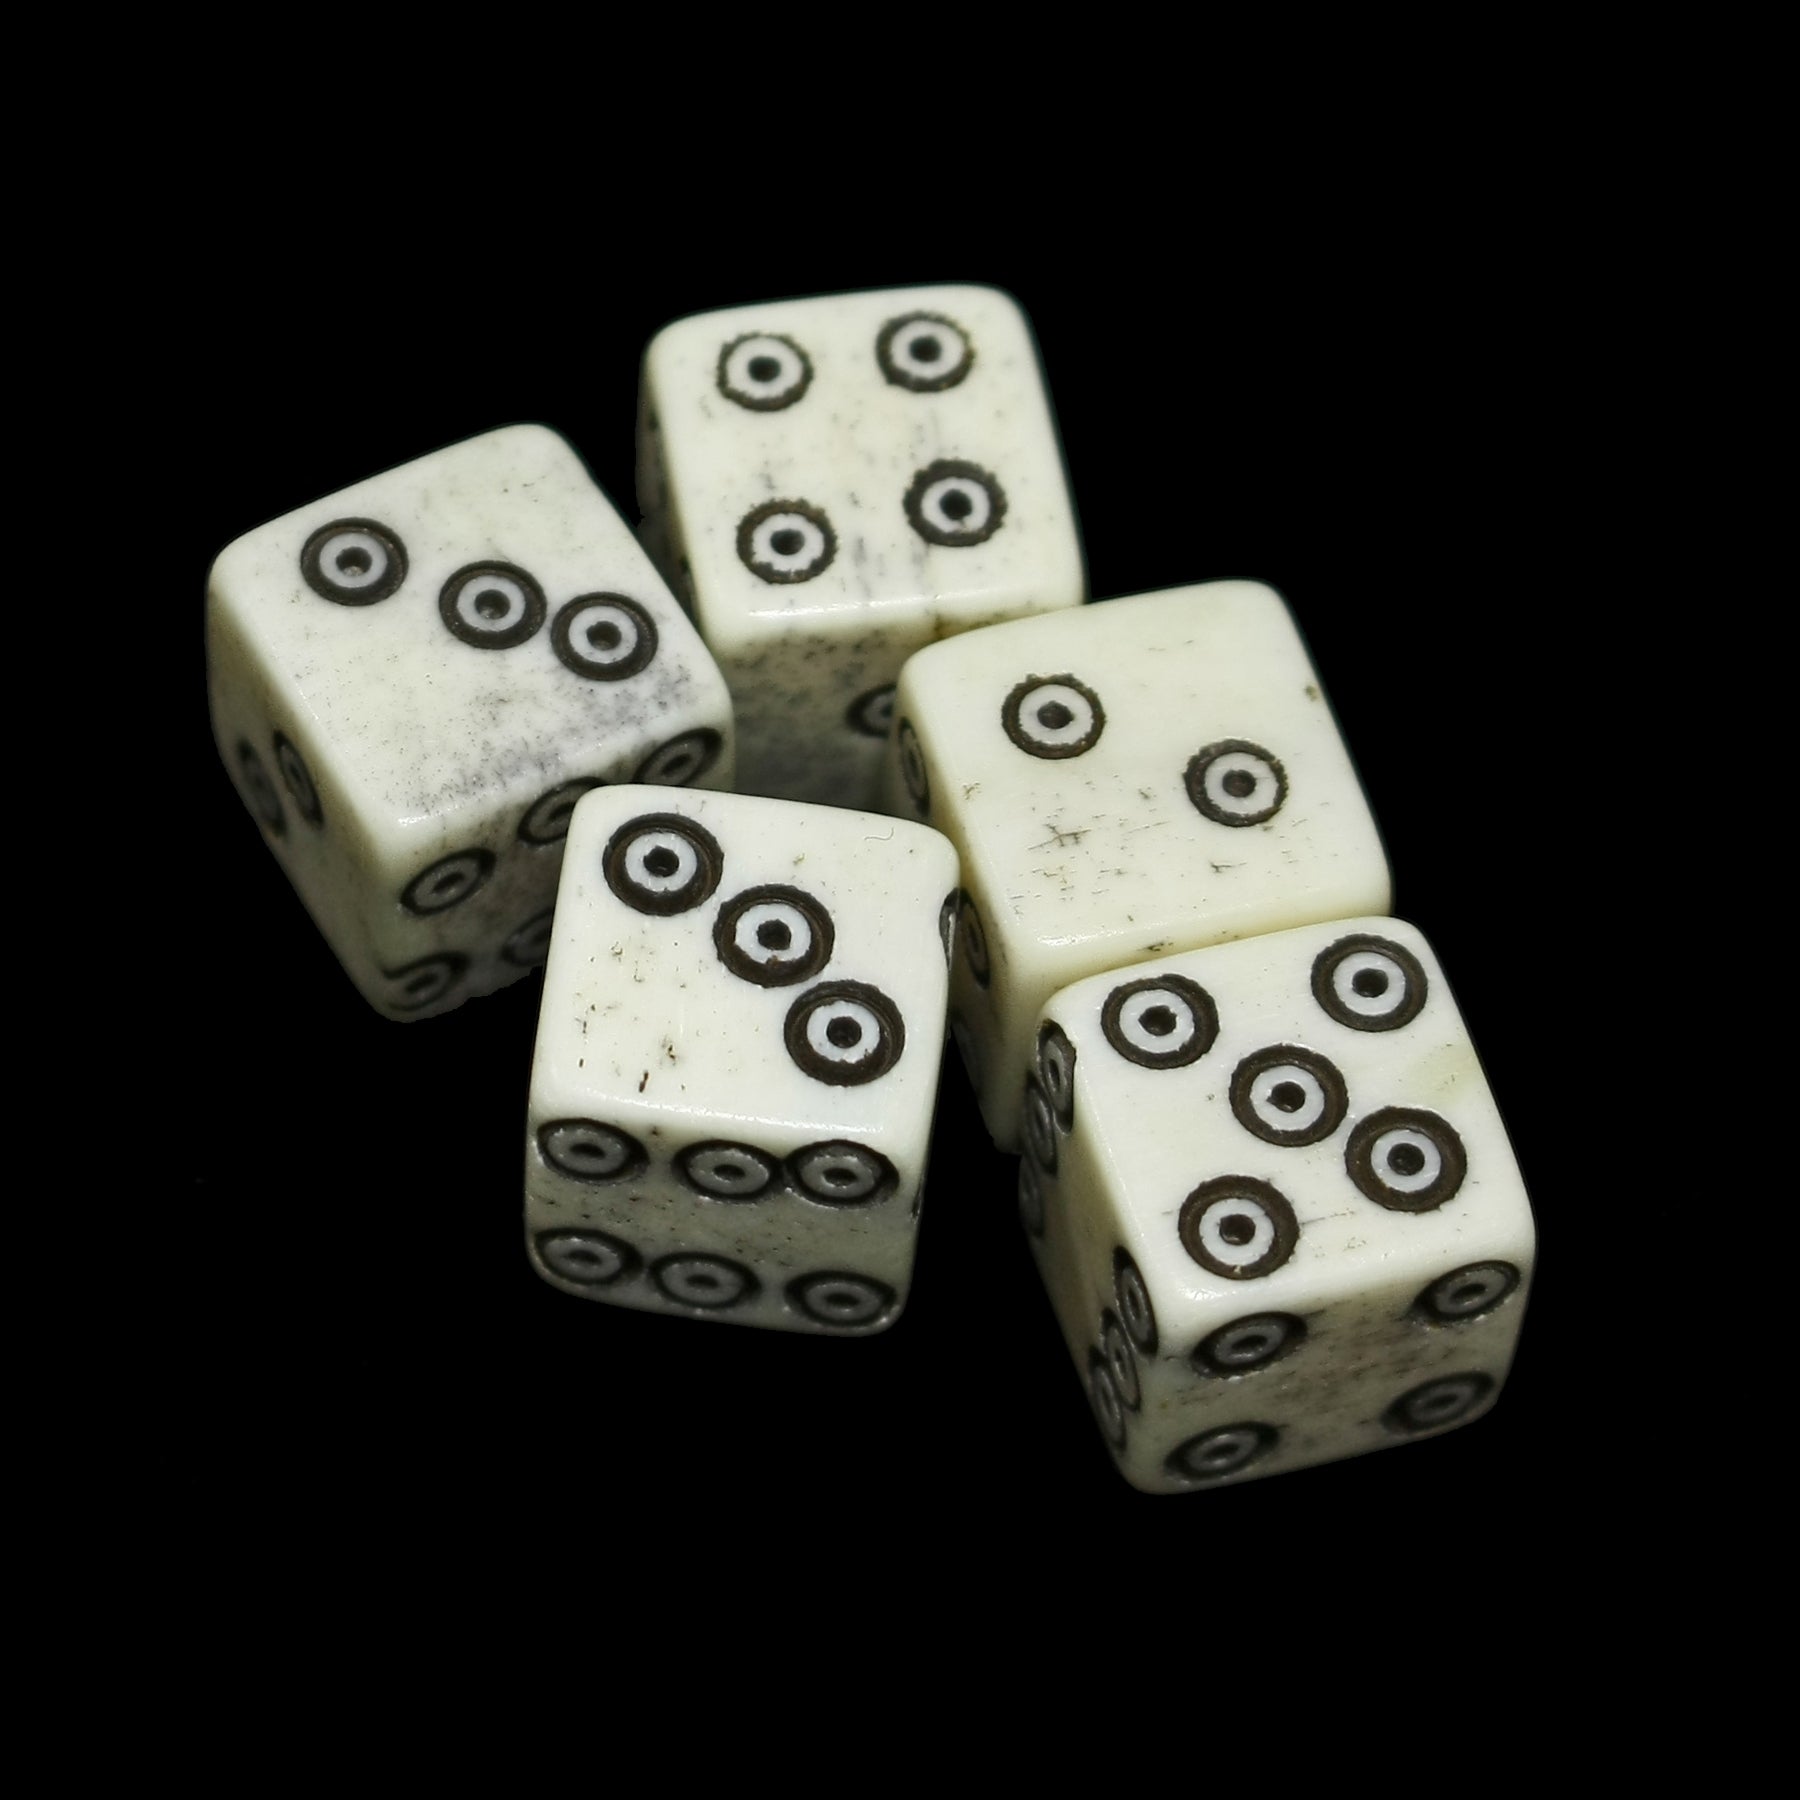 Medium Bone Dice With Dot and Rings Marks x 5